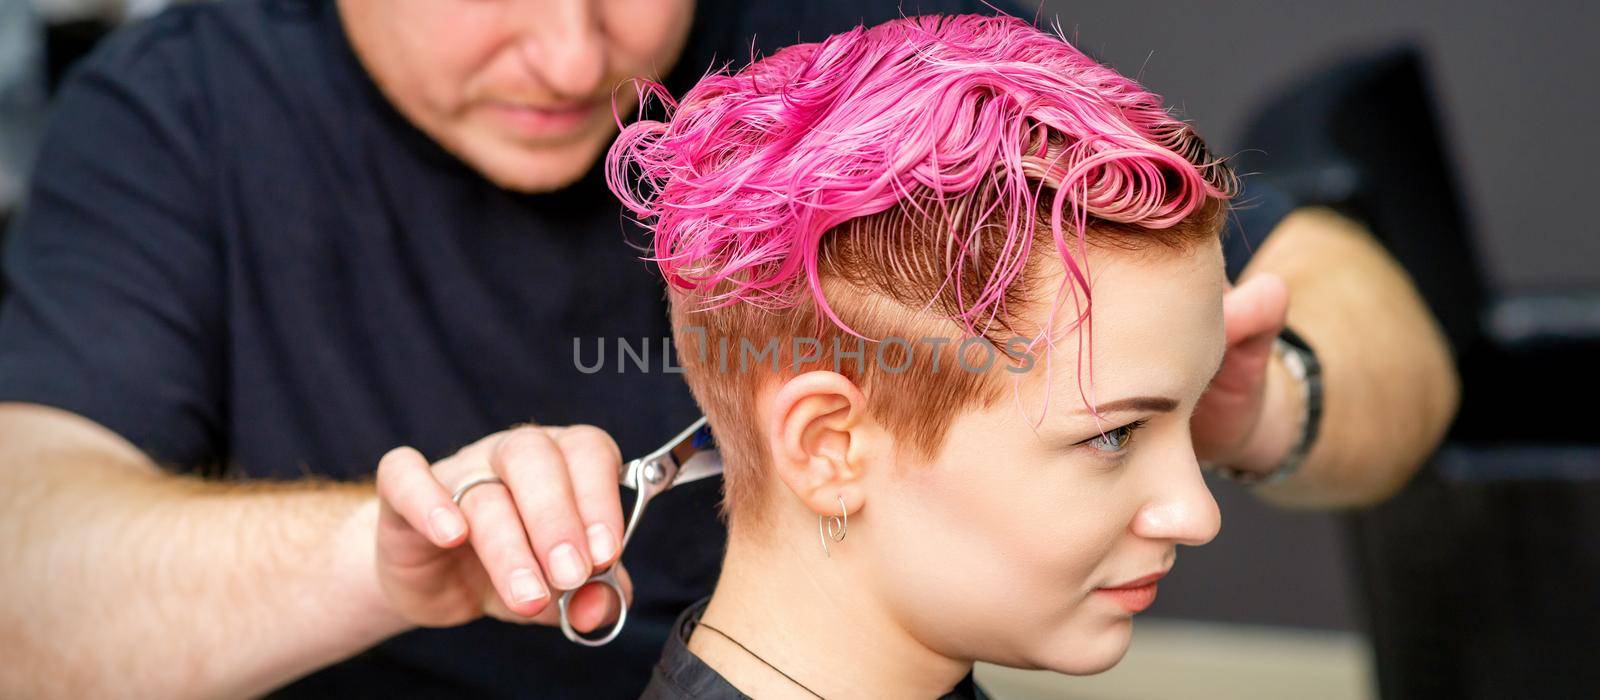 Woman having a new haircut. A male hairstylist is cutting dyed pink short hair with scissors in a hair salon